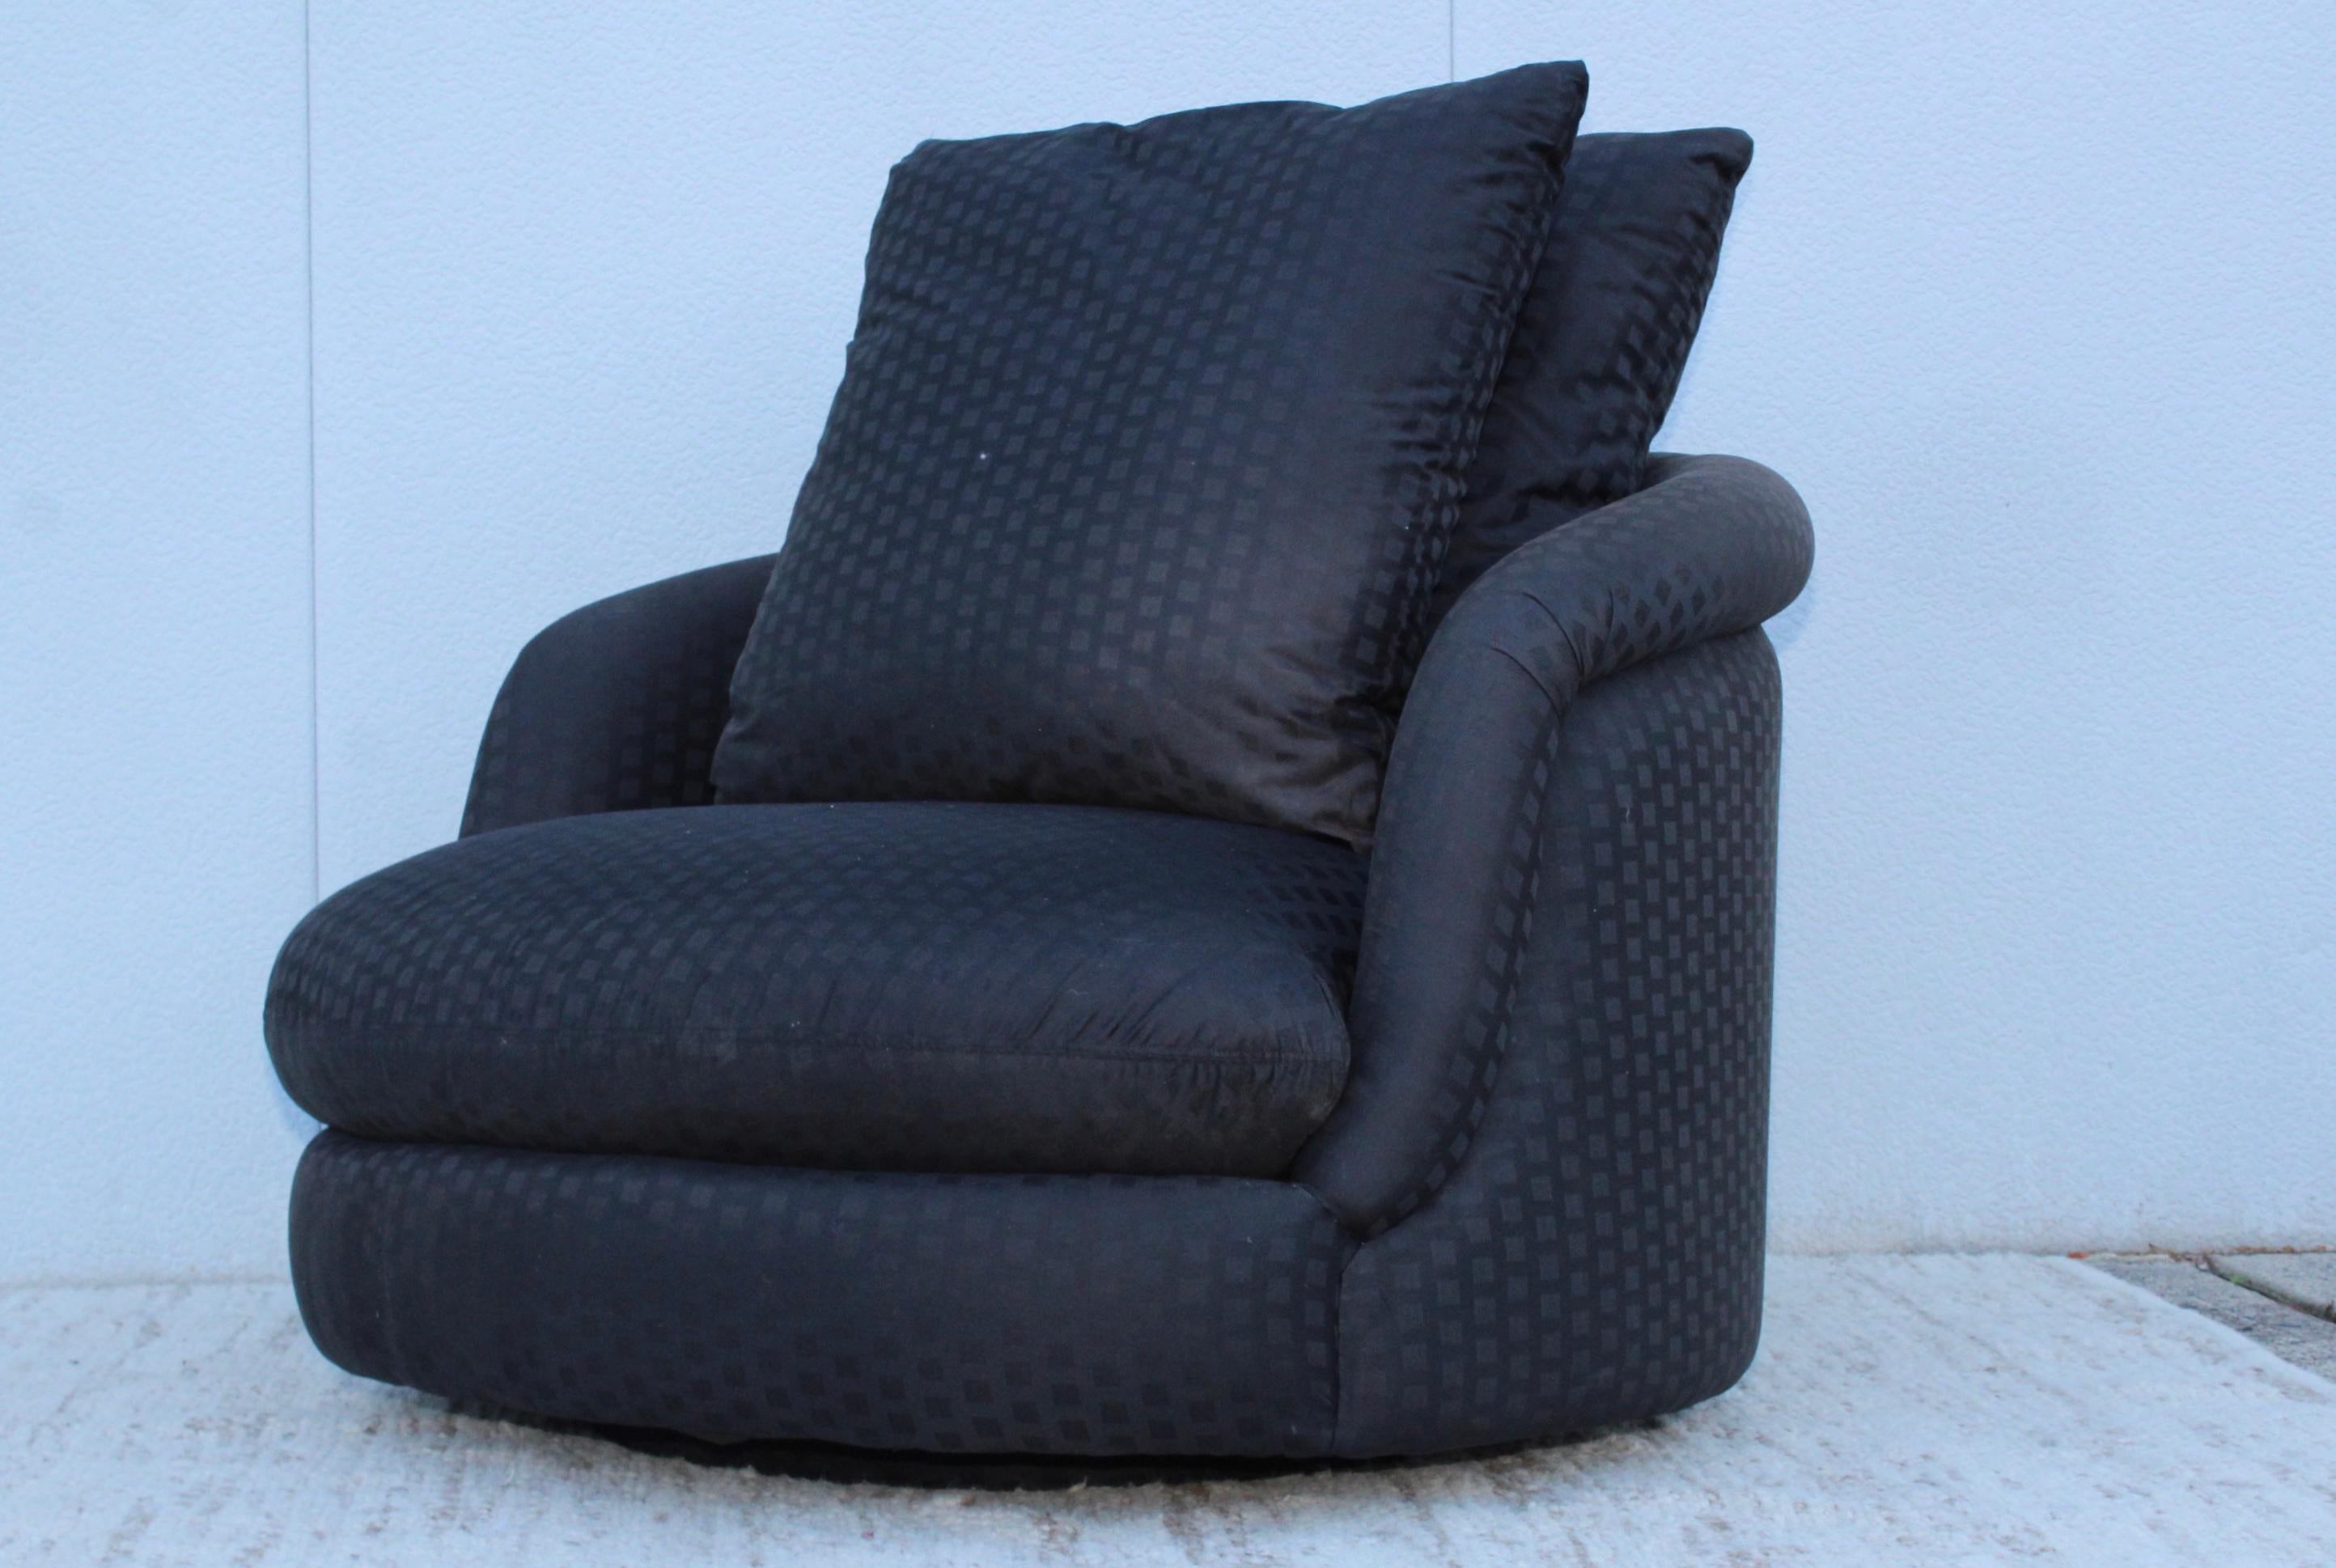 1980s Milo Baughman designed for Thayer Coggin large swivel lounge chair, purchased from the original owner in vintage original condition with minor wear and minor fading to the fabric.